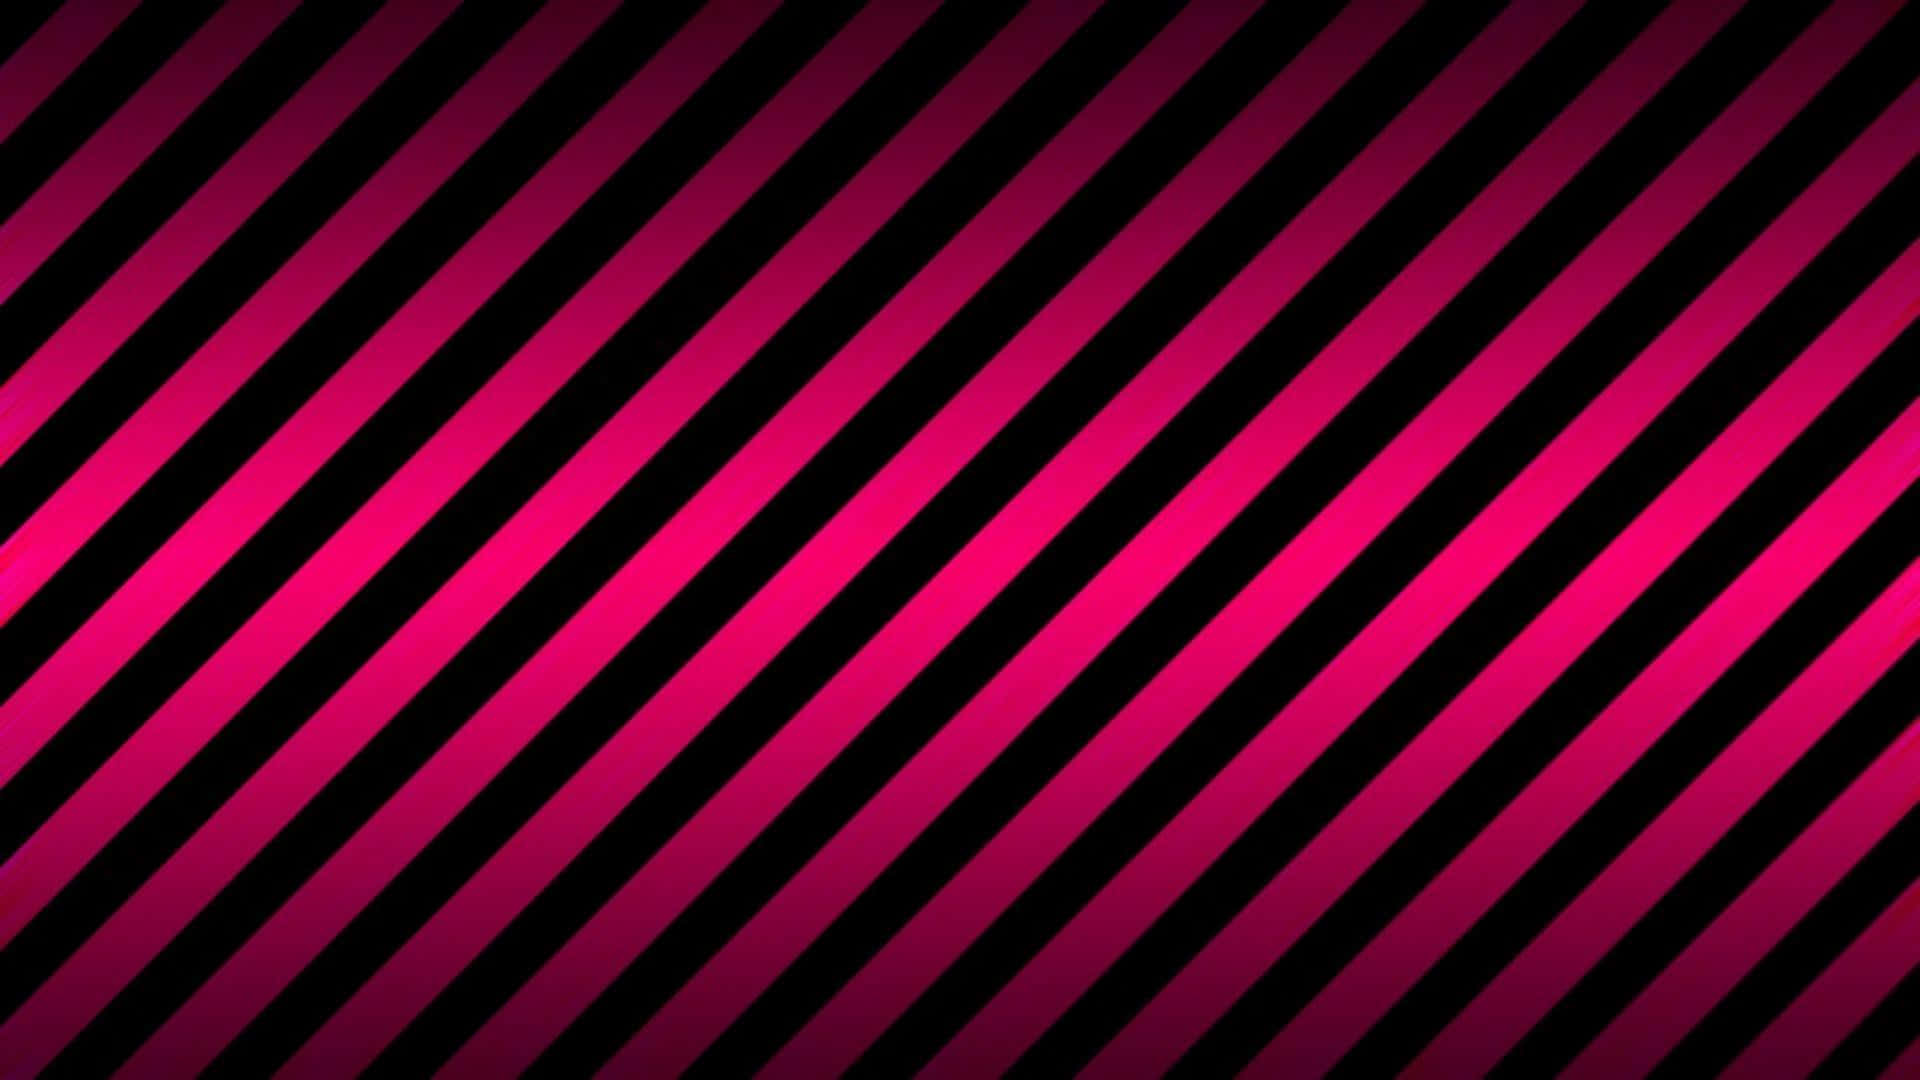 Diagonal Seamless Stripes Pink And Black Background